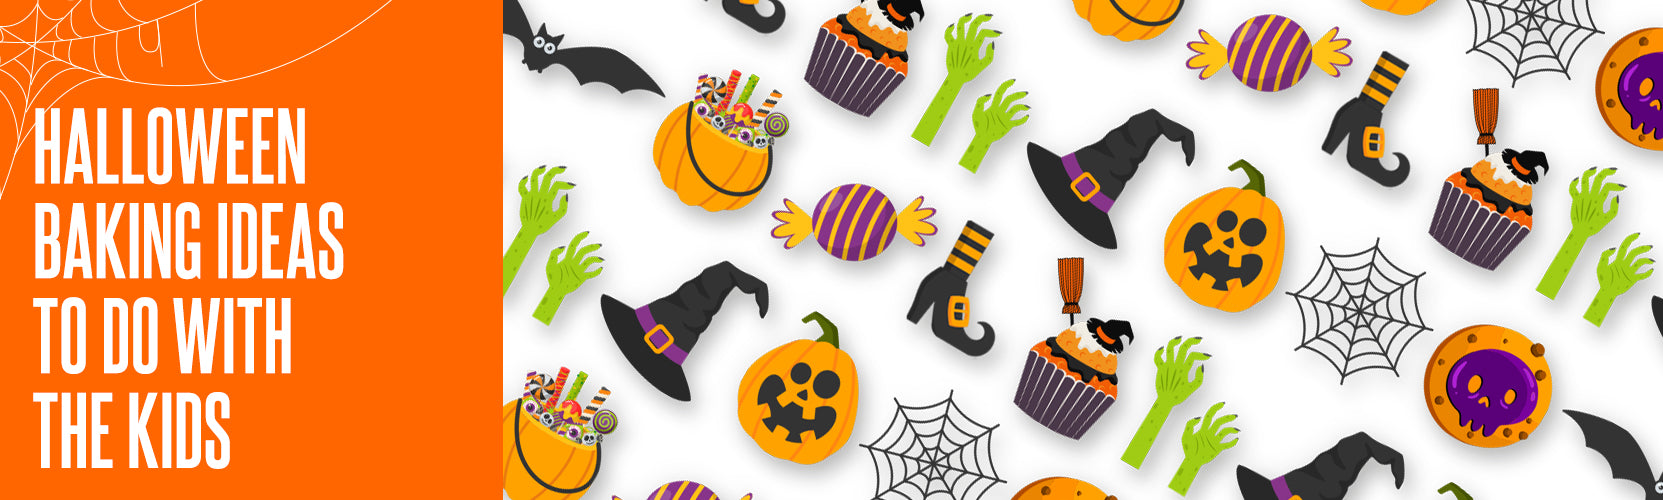 Halloween Baking Ideas To Do With The Kids